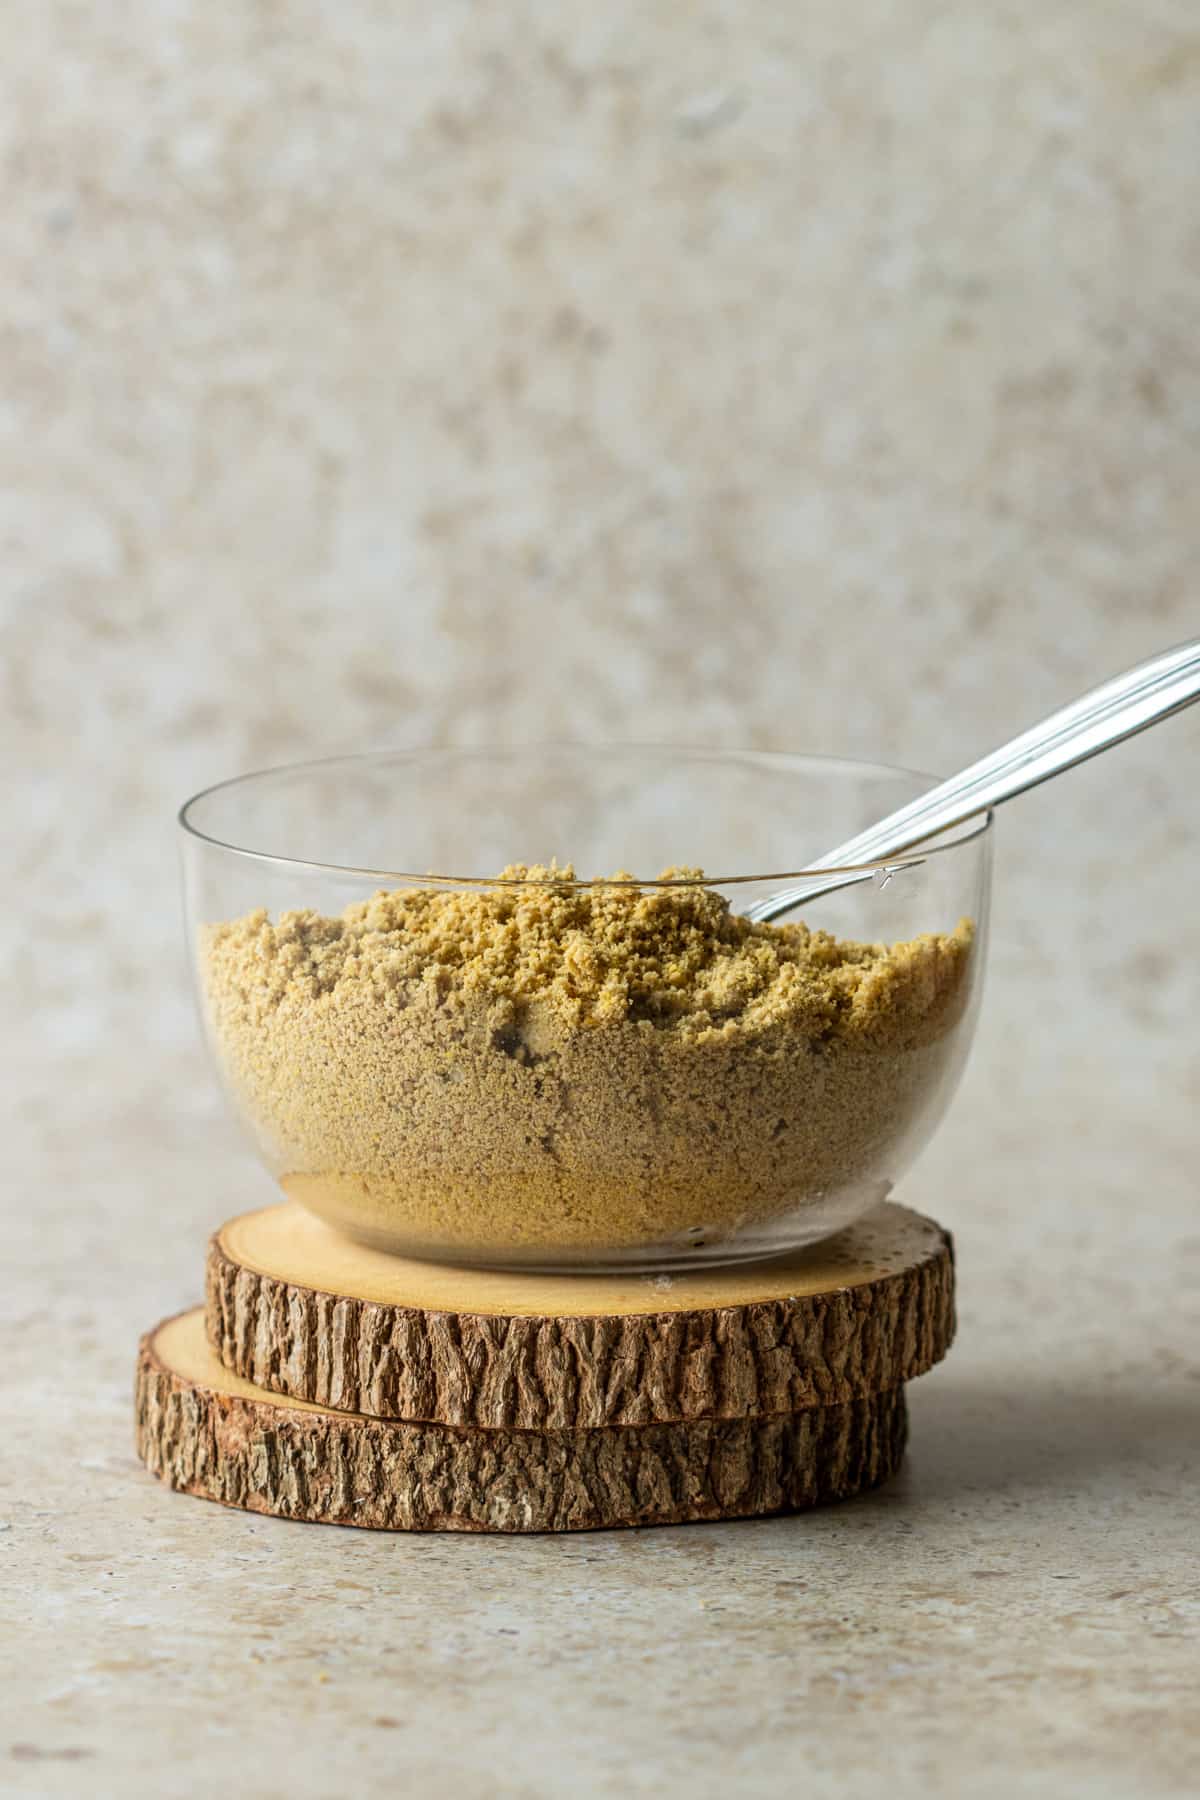 Homemade vegan parmesan cheese in a clear bowl with a spoon on two wooden coasters.